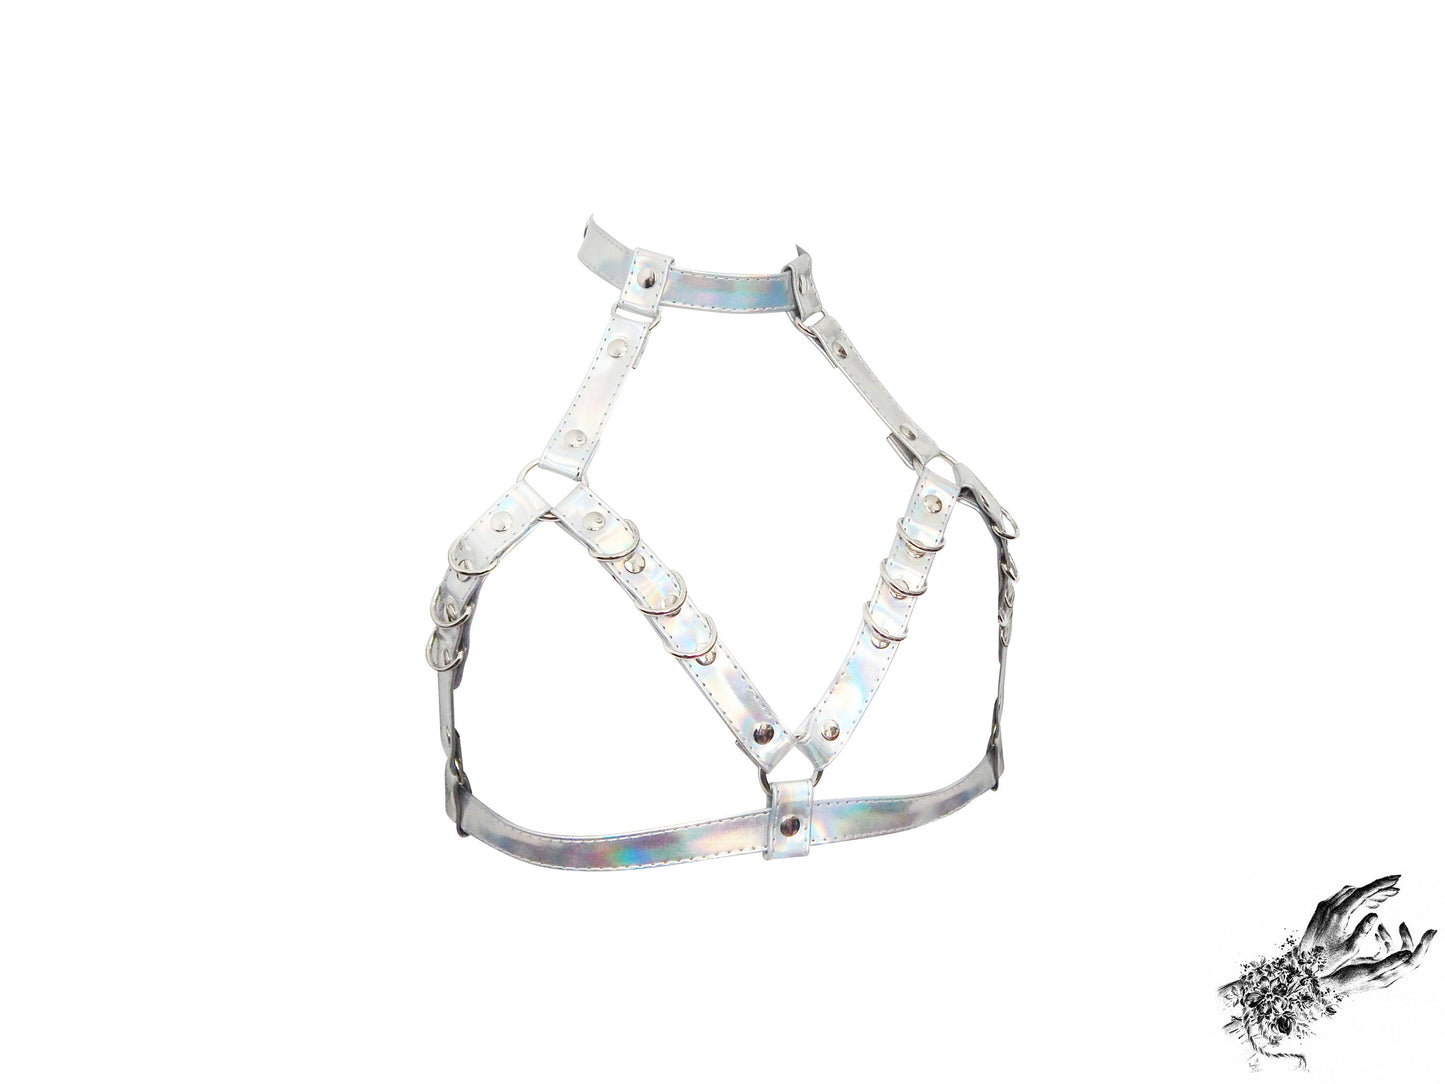 Holographic Silver D Ring Harness Bra